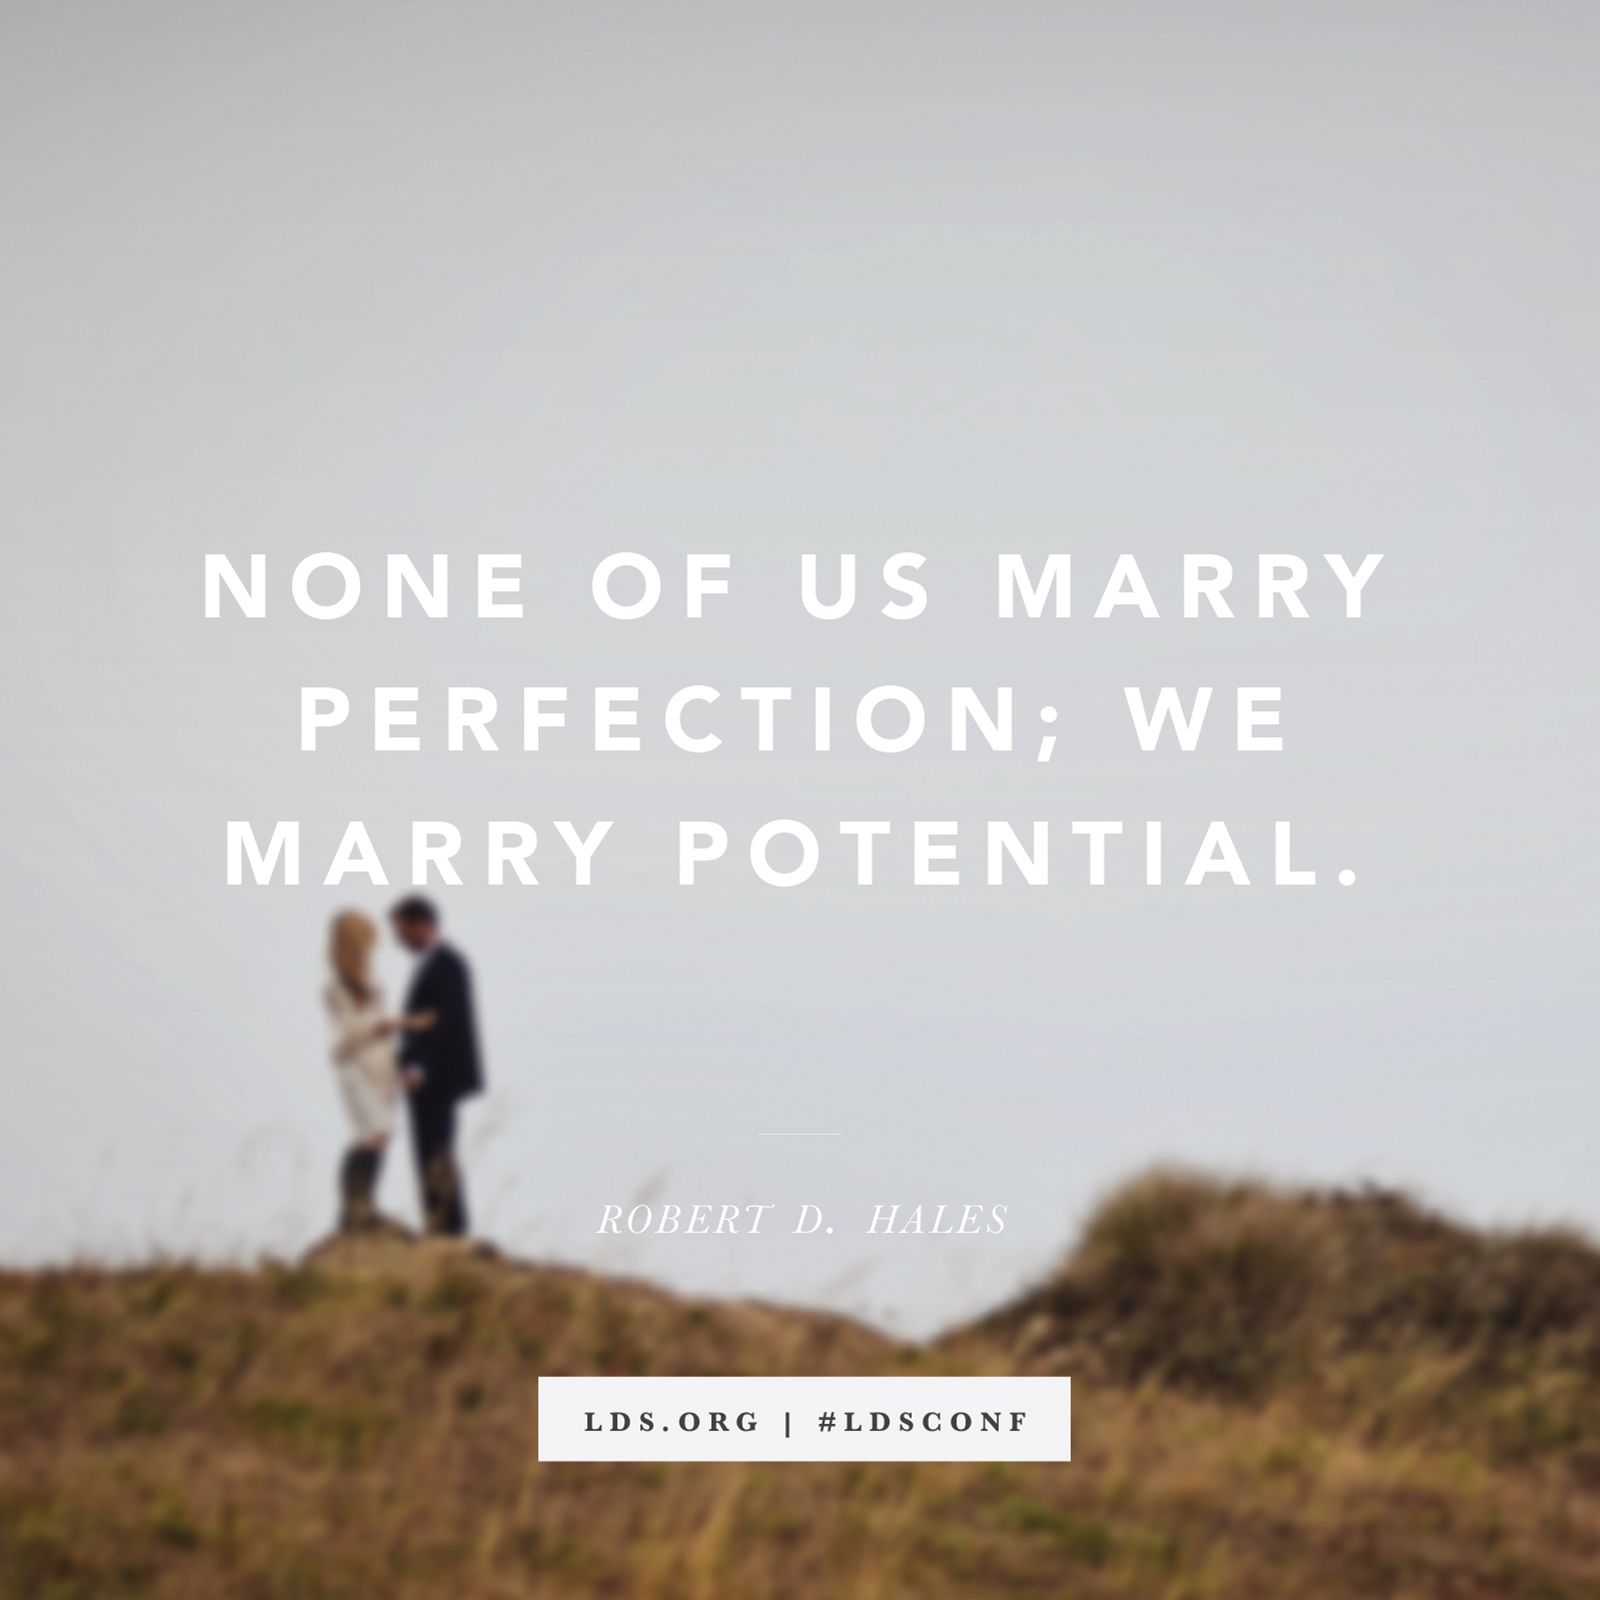 “None of us marry perfection; we marry potential.” —Elder Robert D. Hales, “Meeting the Challenges of Today’s World”